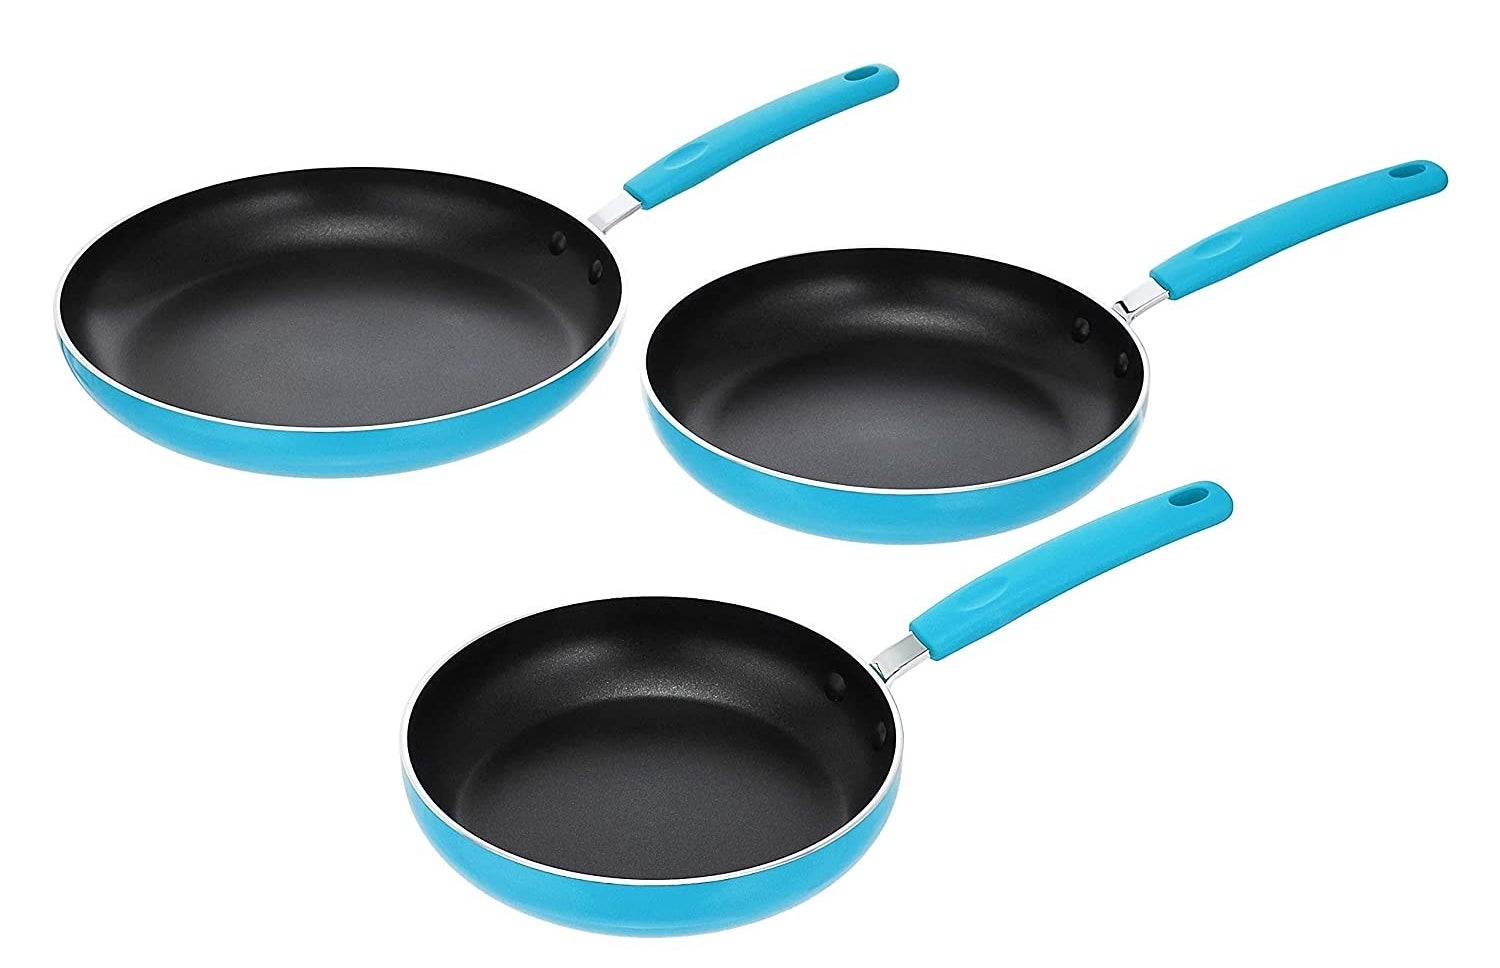 Three pans of different sizes in turquoise